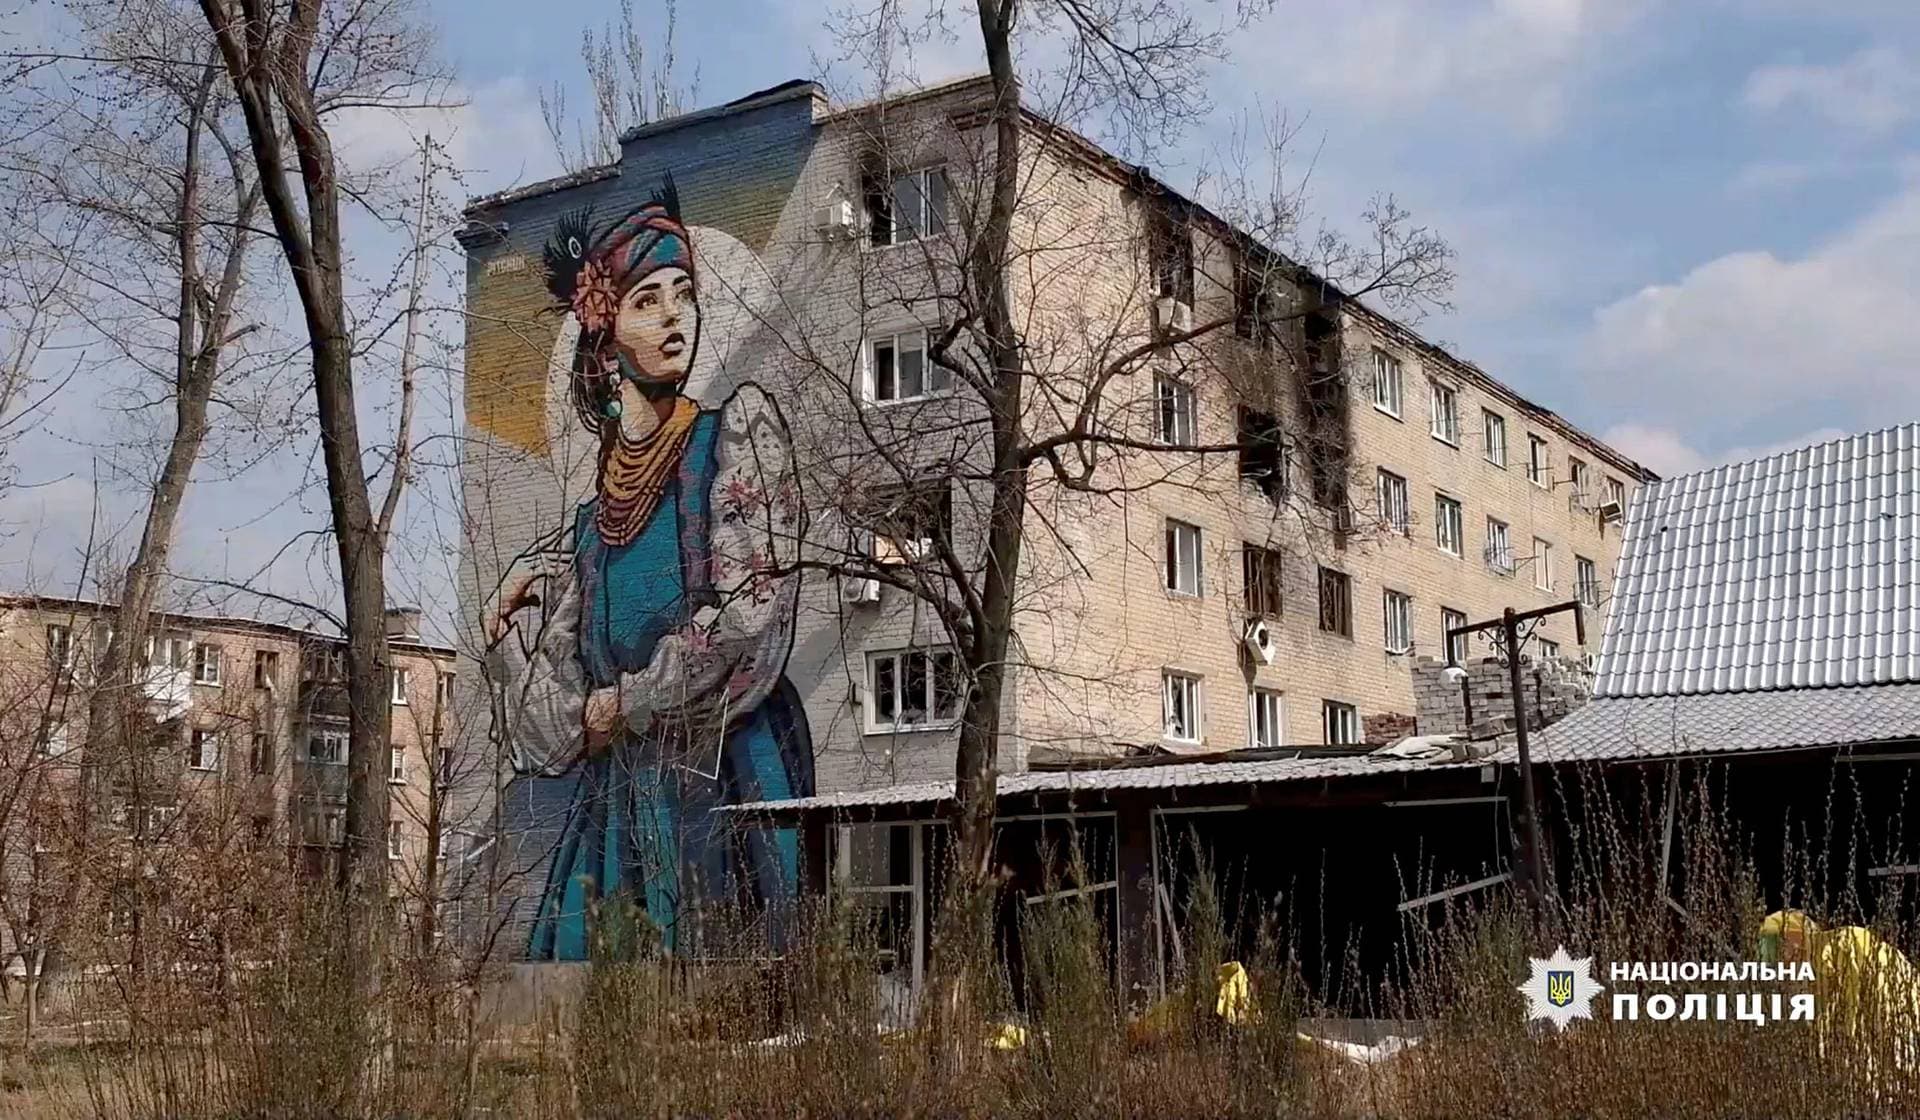 A damaged building with a mural in Avdiivka